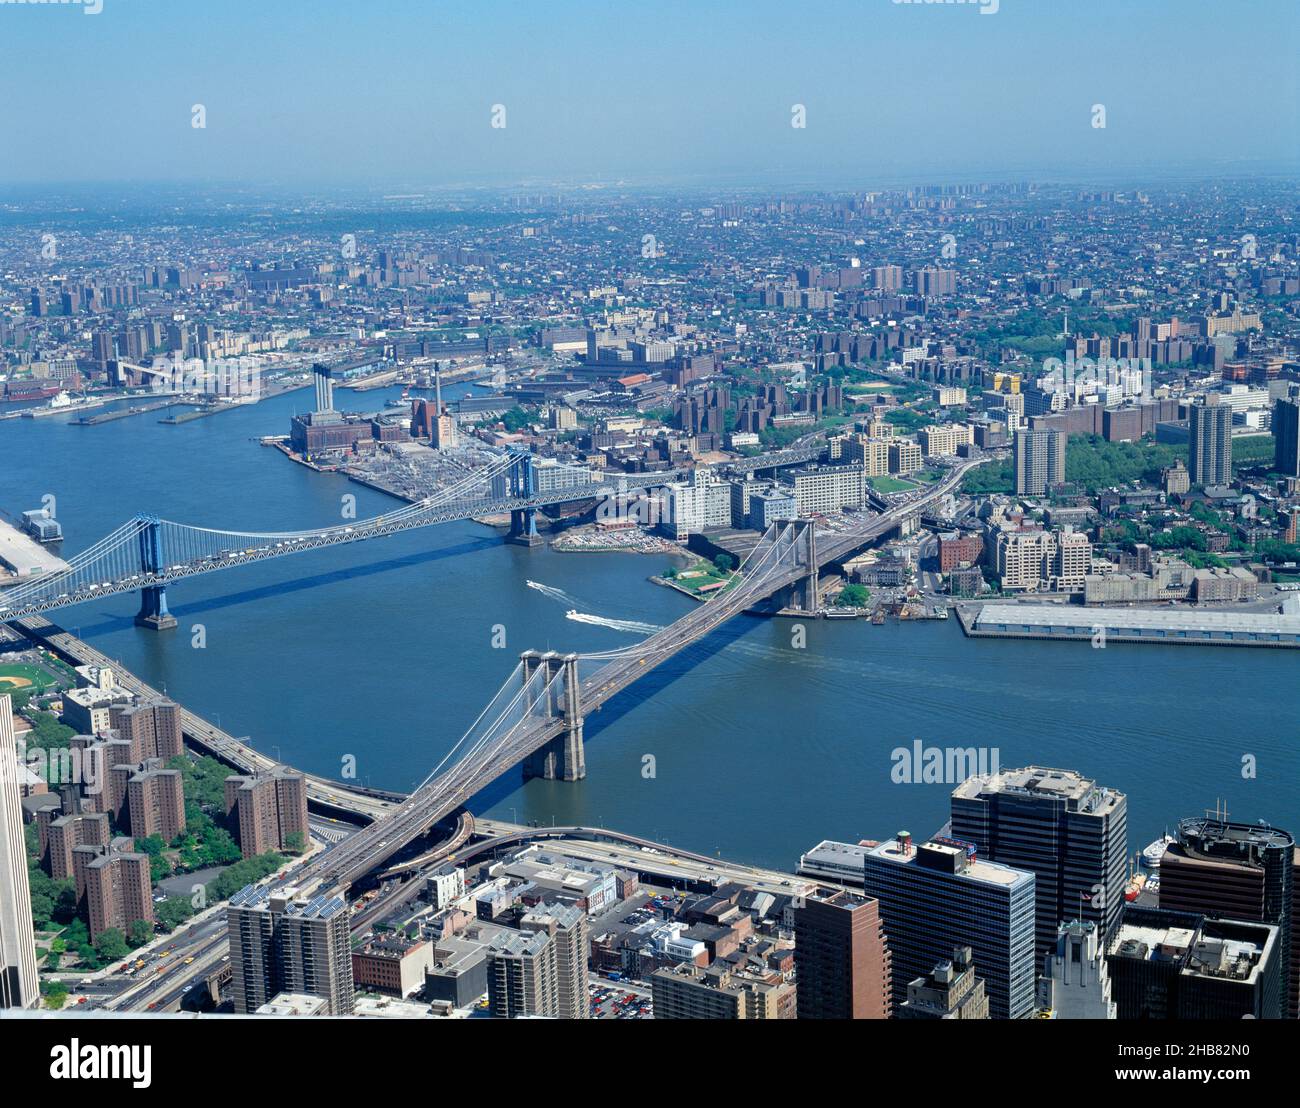 United States. New York City. High viewpoint of East River bridges. Stock Photo